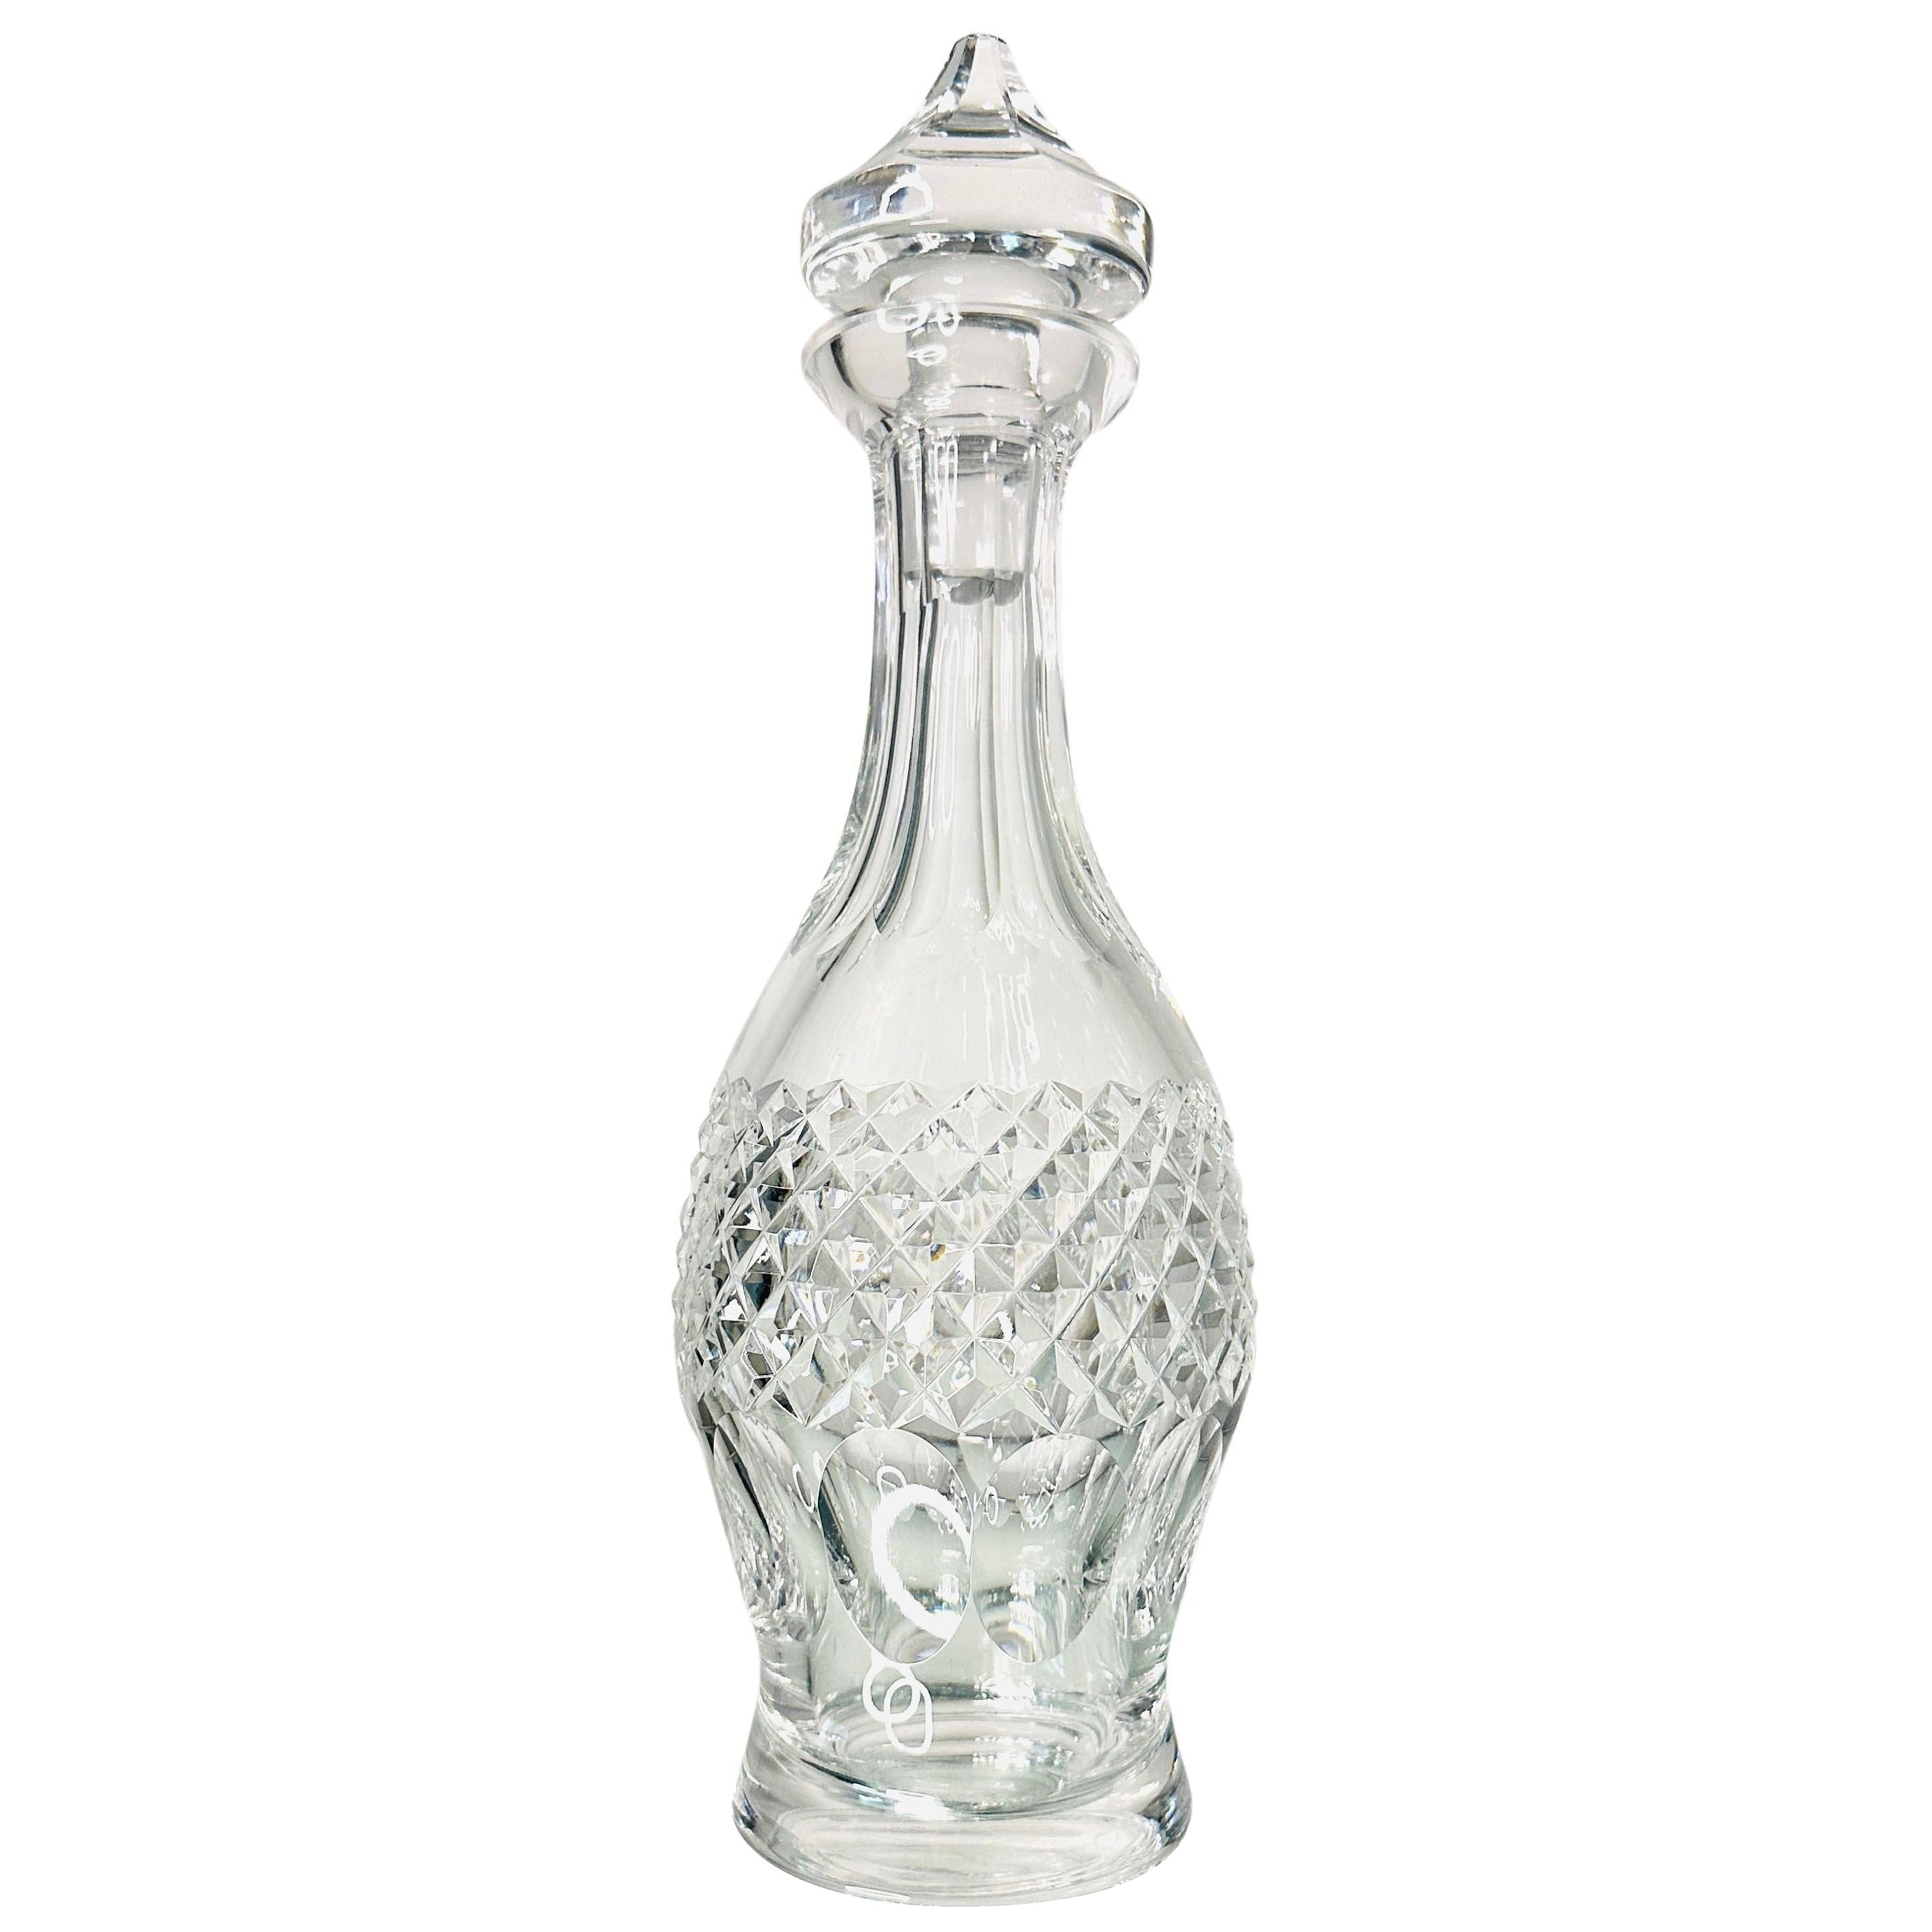 1970s Waterford Crystal Decanter Featuring Faceted Circles and Etched Diamonds